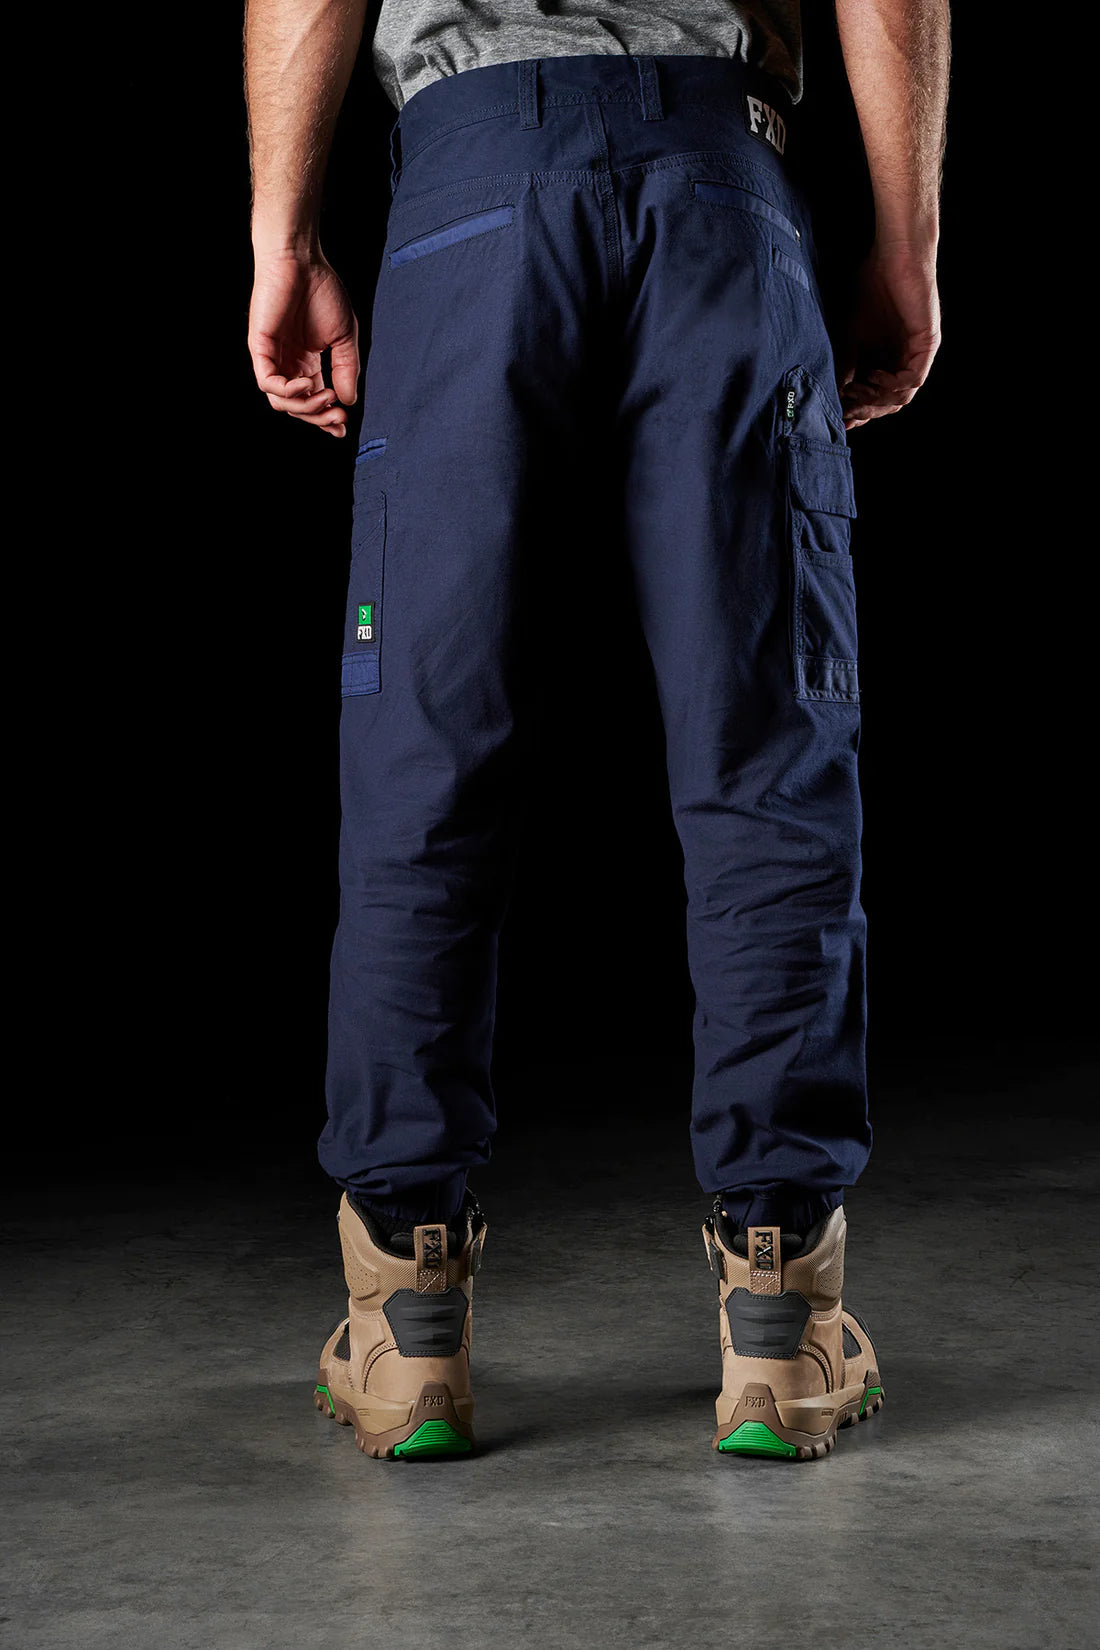 FXD WP-4™ Stretch Cuffed Pant